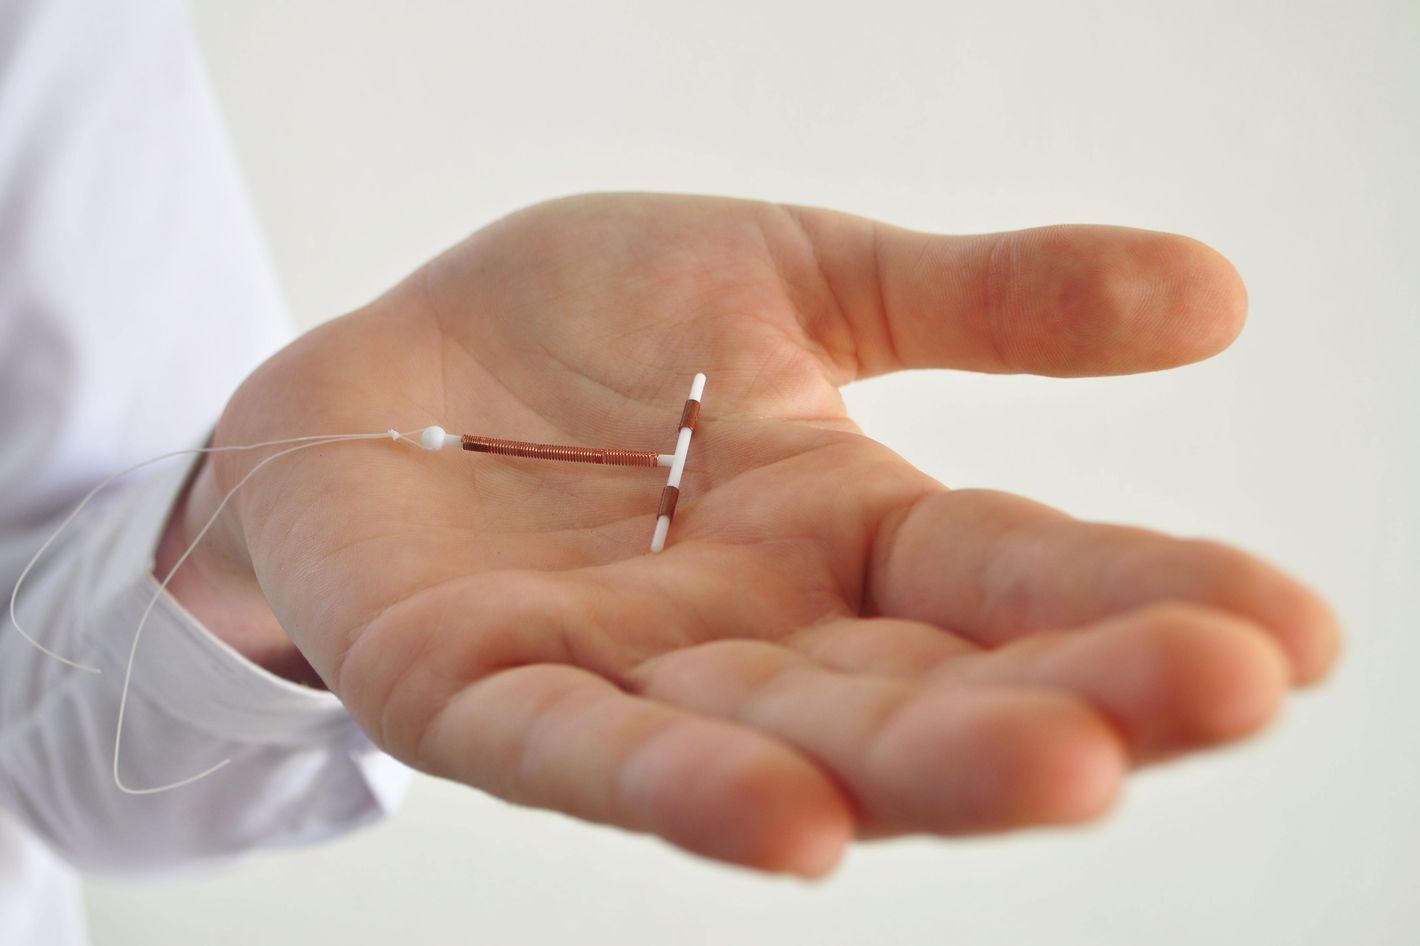 IUD Control: 11 Questions Ask Before Getting It